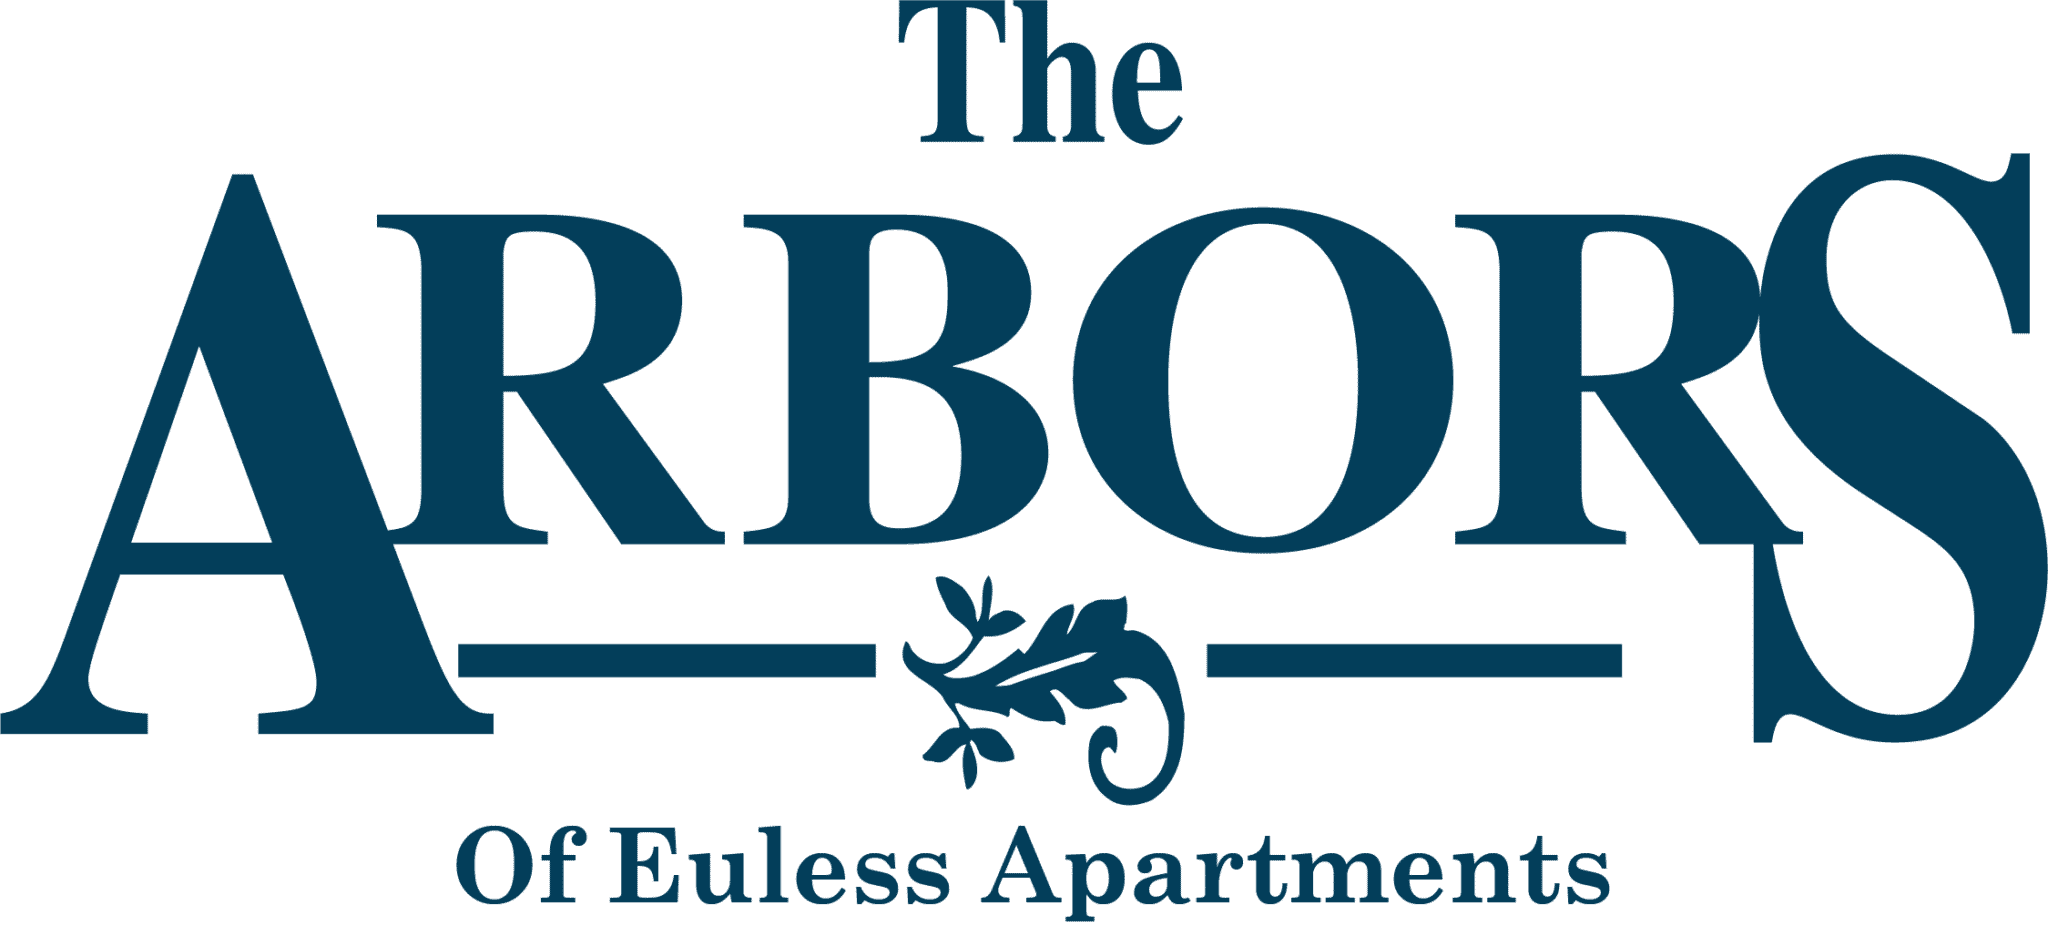 The Arbors of Euless Apartments Logo